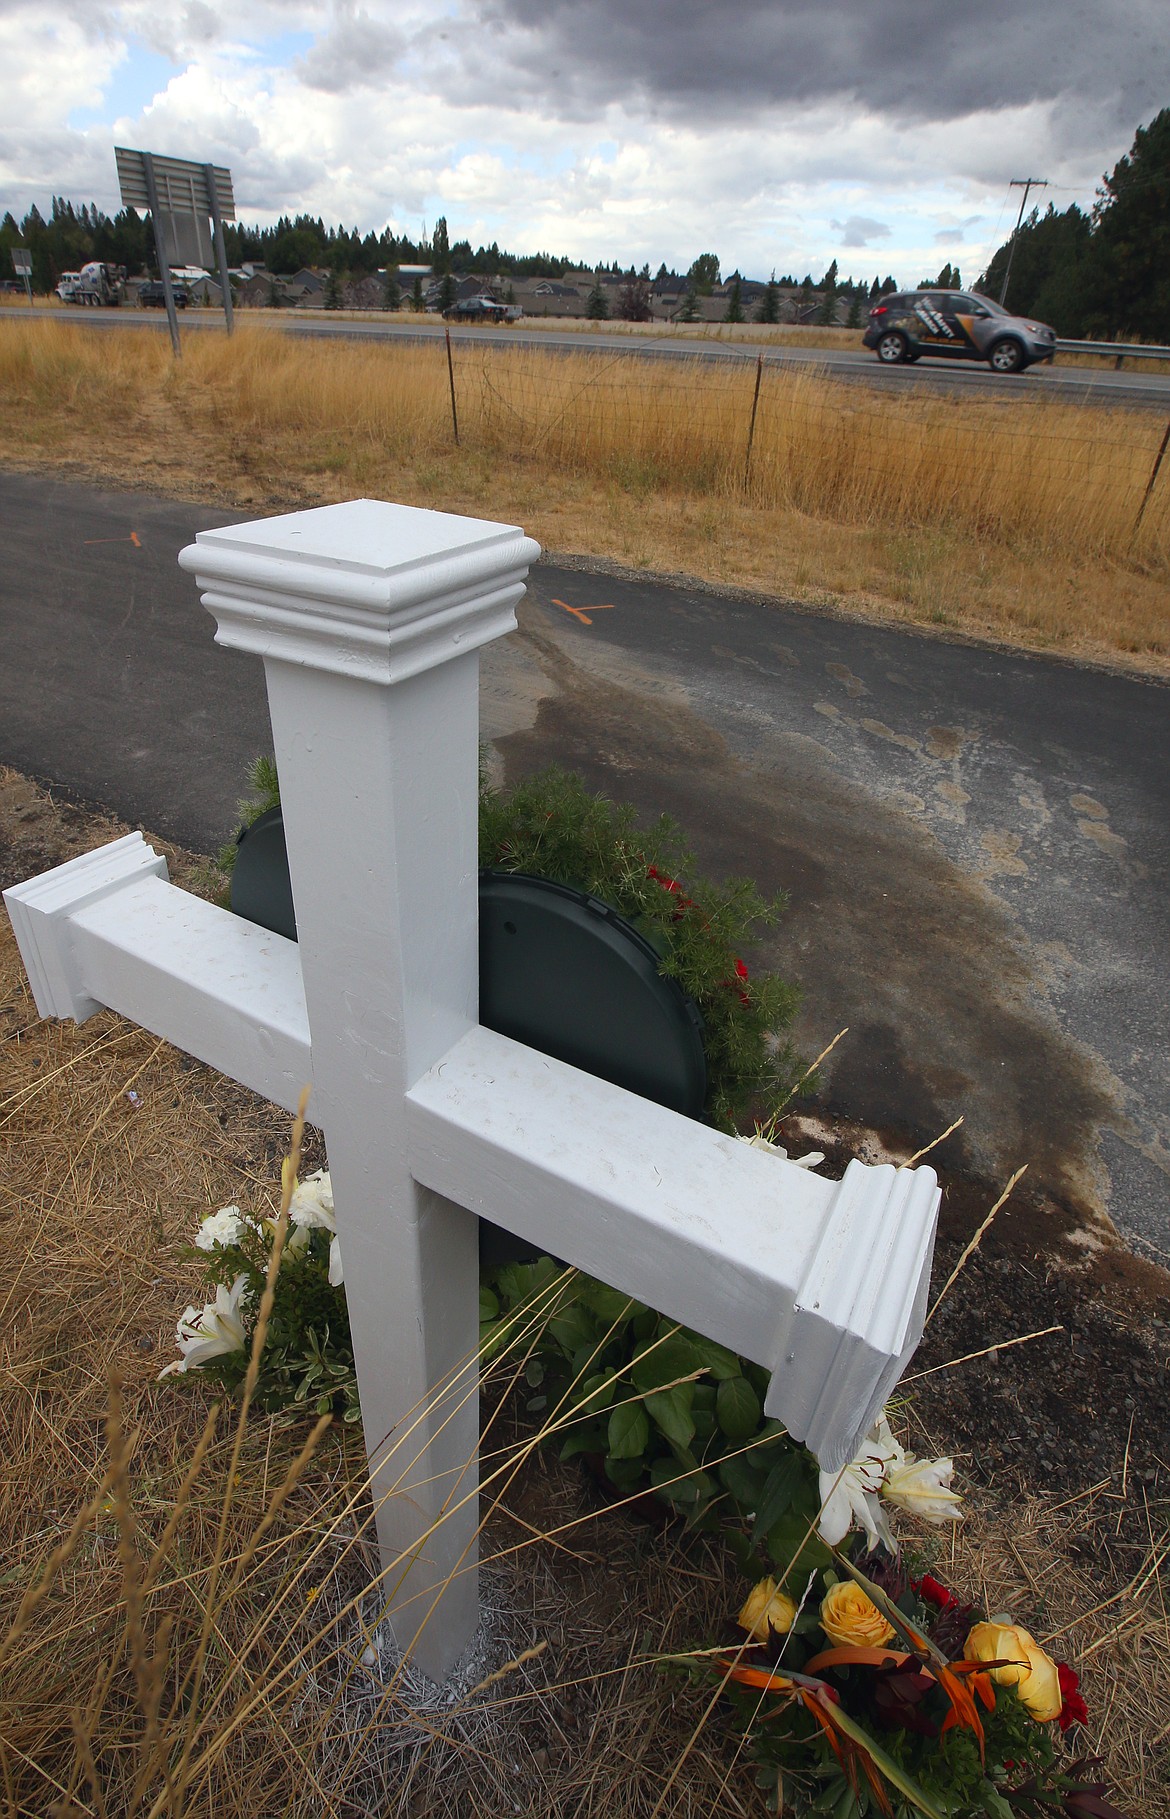 A memorial of a cross and flowers stands on the North Idaho Centennial Trail near the site of a fatal crash on Sept. 11 on Interstate 90. A preliminary hearing scheduled today for Christine M. Cann, 57, of Coeur d’Alene, the driver charged with felony vehicular manslaughter in the case, was rescheduled for Oct. 6. The head-on collision killed Jeremy T. Scherer, 24, of Spokane Valley. Police said Cann said drove west in the eastbound lanes I-90 in a 2020 Toyota RAV4 before striking Scherer's Chevy Sonic about 12:30 p.m. Cann was arrested later that night and remains at the Kootenai County jail on $75,000 bail. Investigators with Idaho State Police and the Kootenai County Prosecutors Office have asked anyone who witnessed the crash to contact ISP at 208-209-8730.